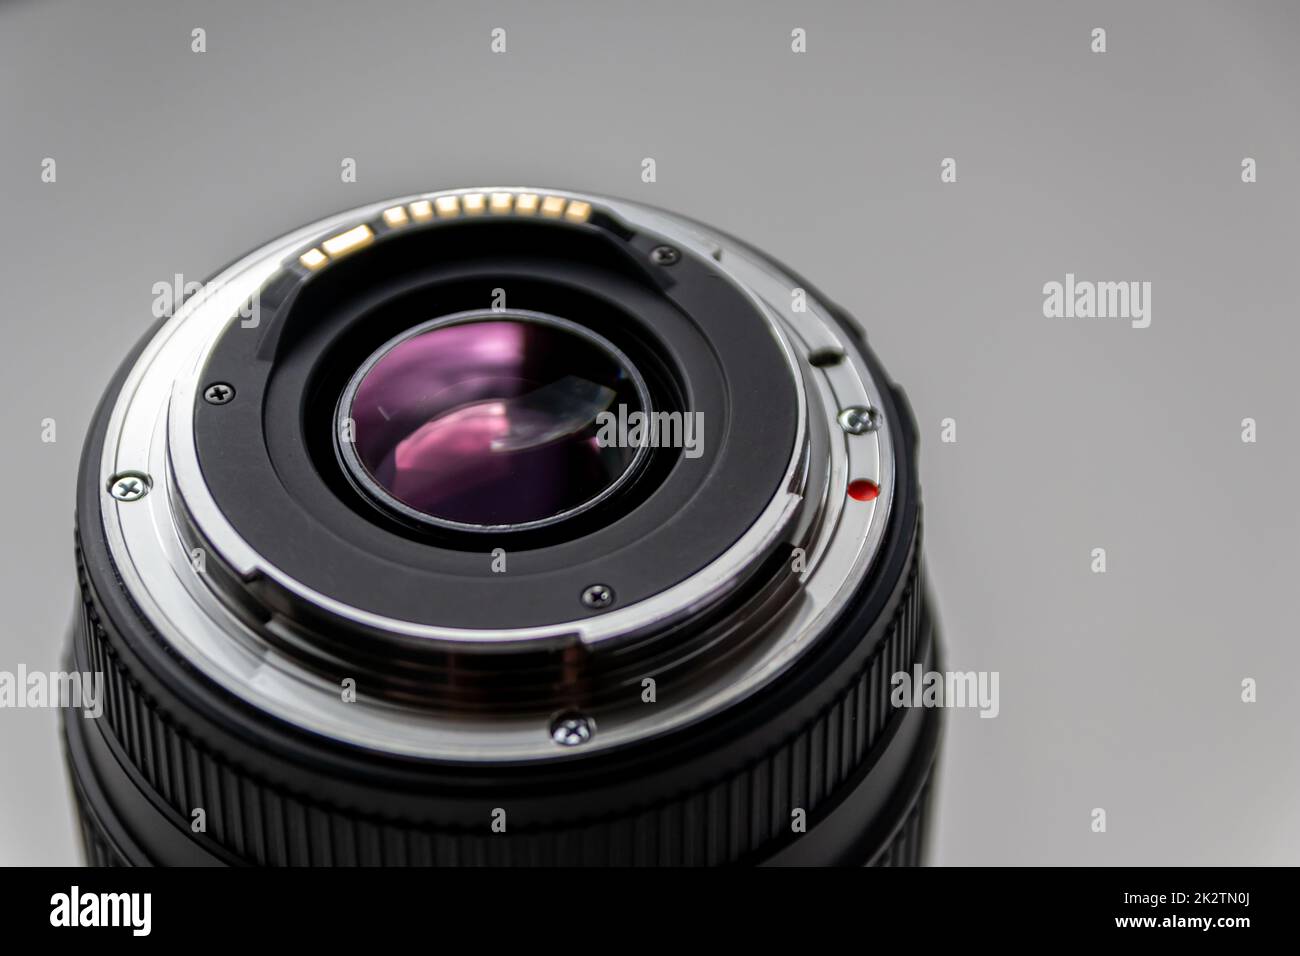 Back side of a dslr camera lens objective for professional photography with camera mount details in macro view with beautiful lens details for optical precision in portrait photography Stock Photo